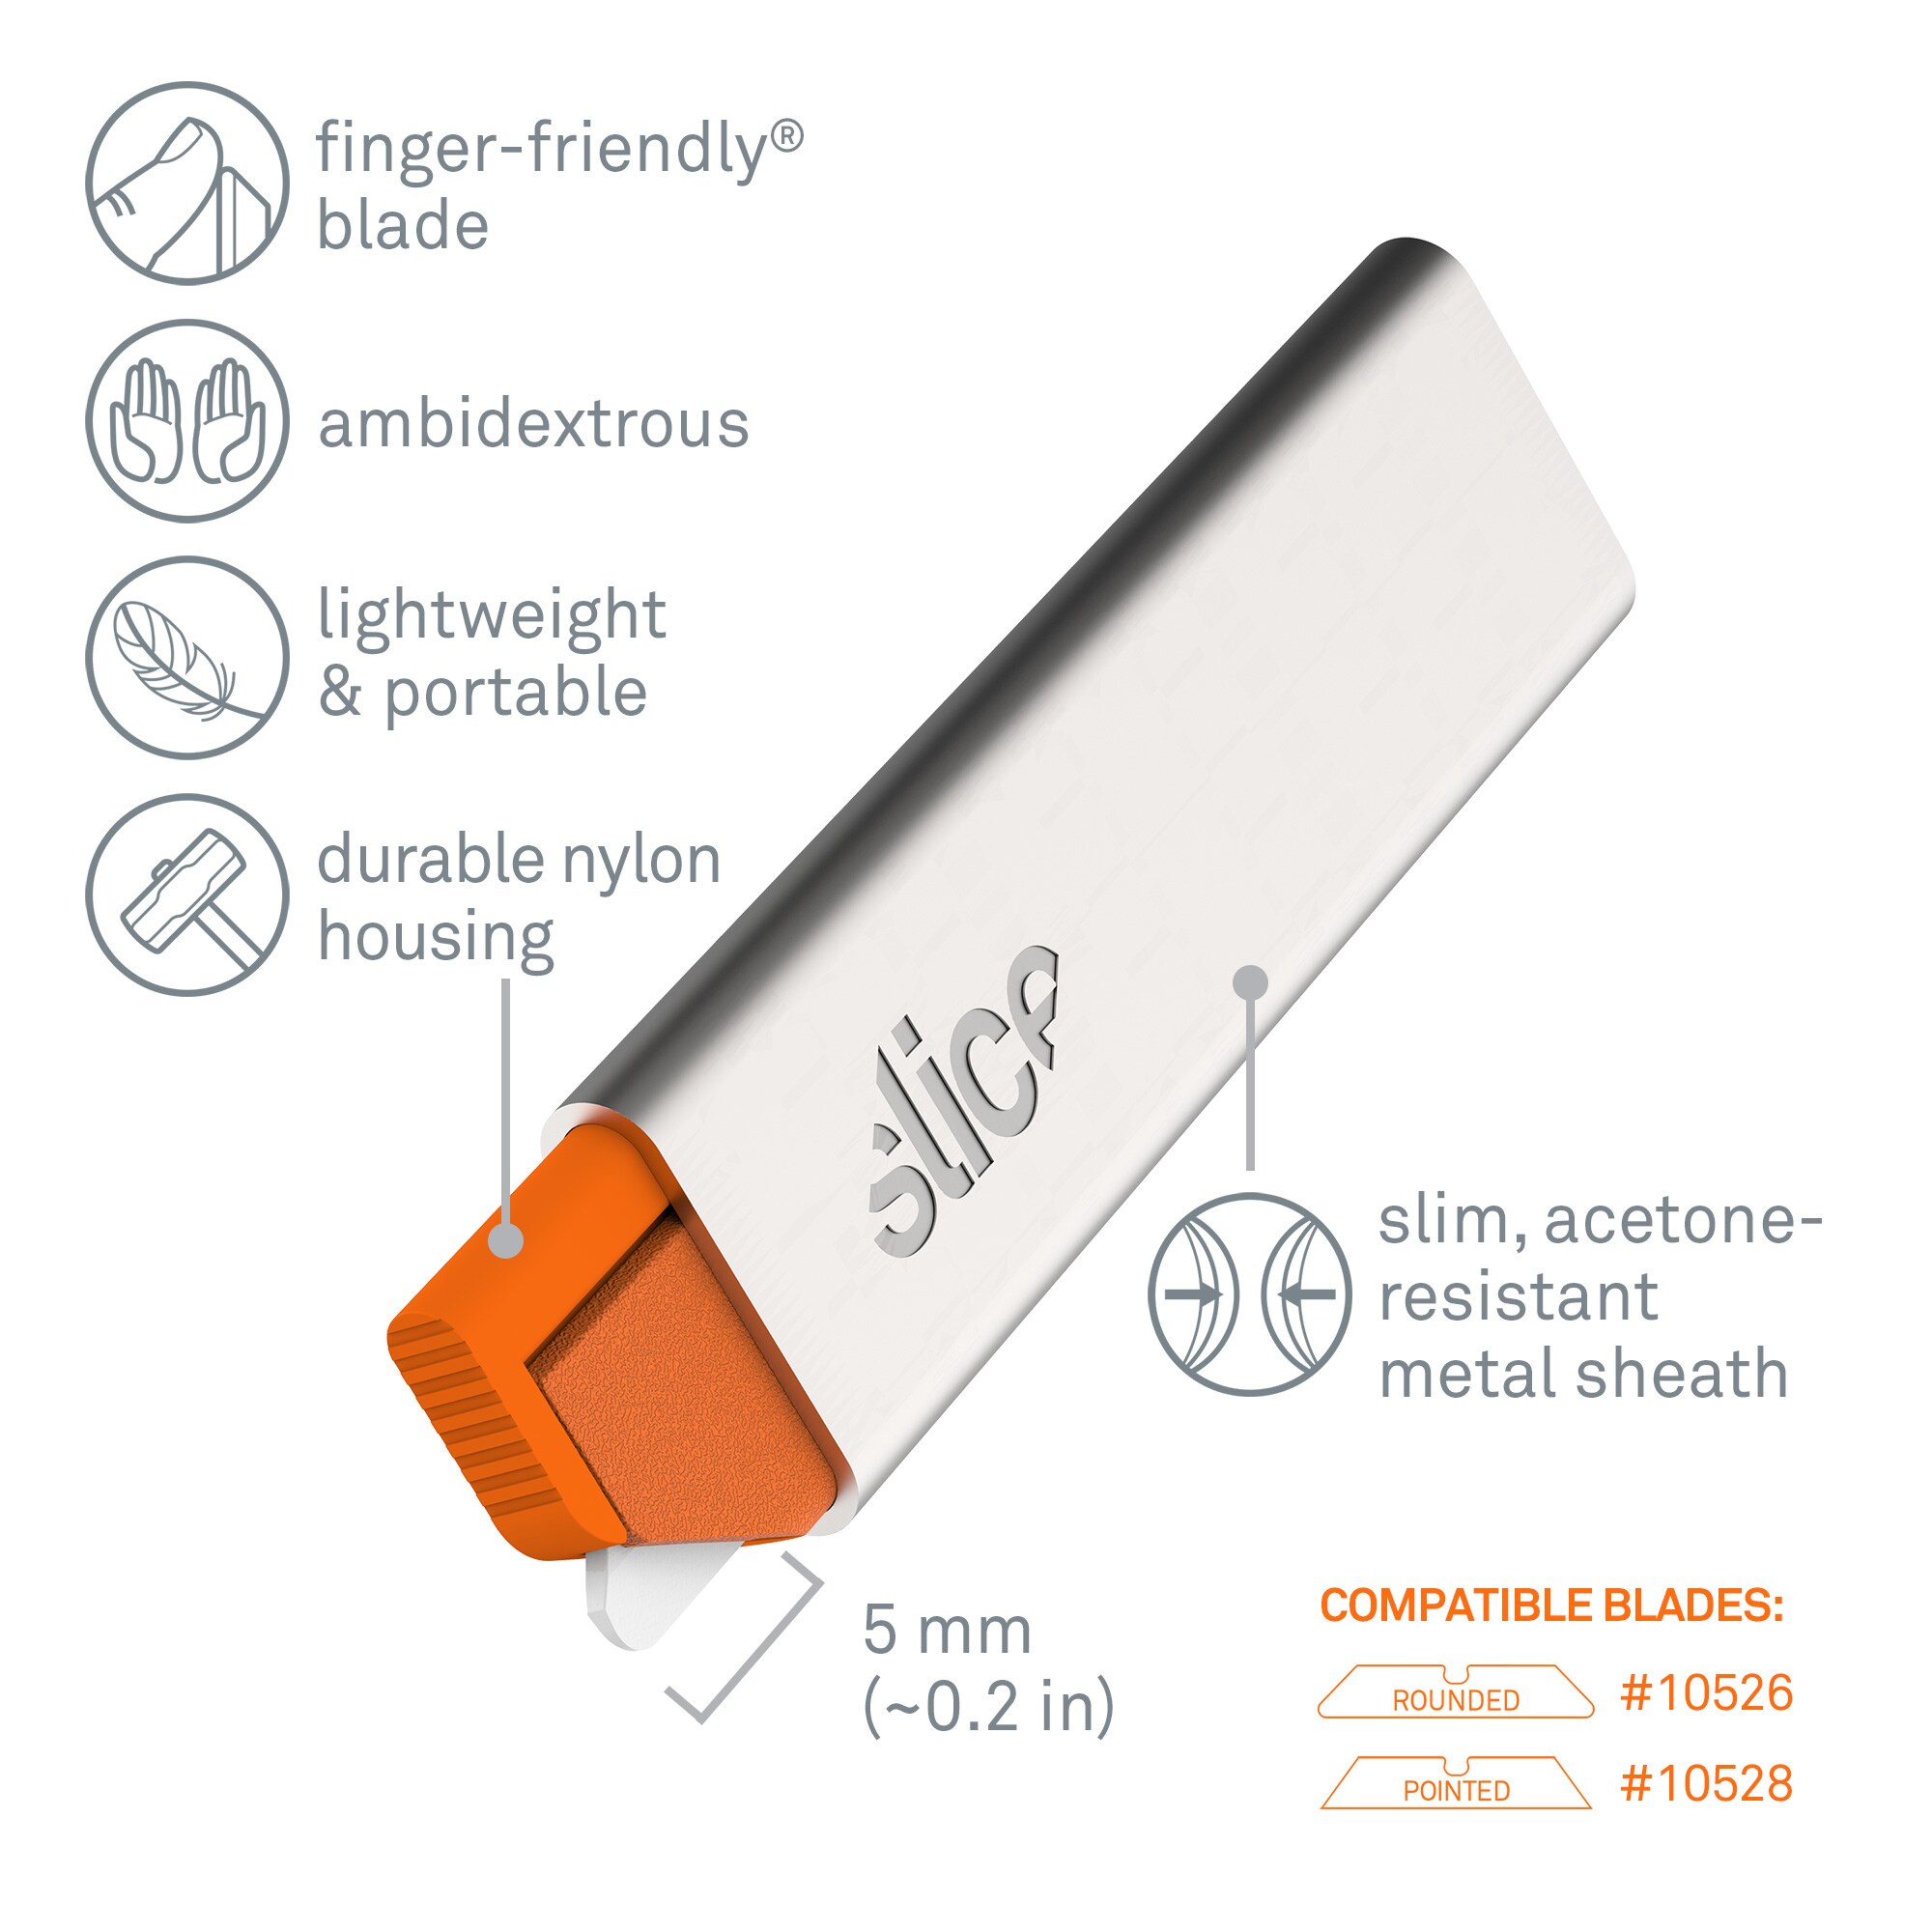 Slice Manual Box Cutter 1-Blade Retractable Utility Knife in the